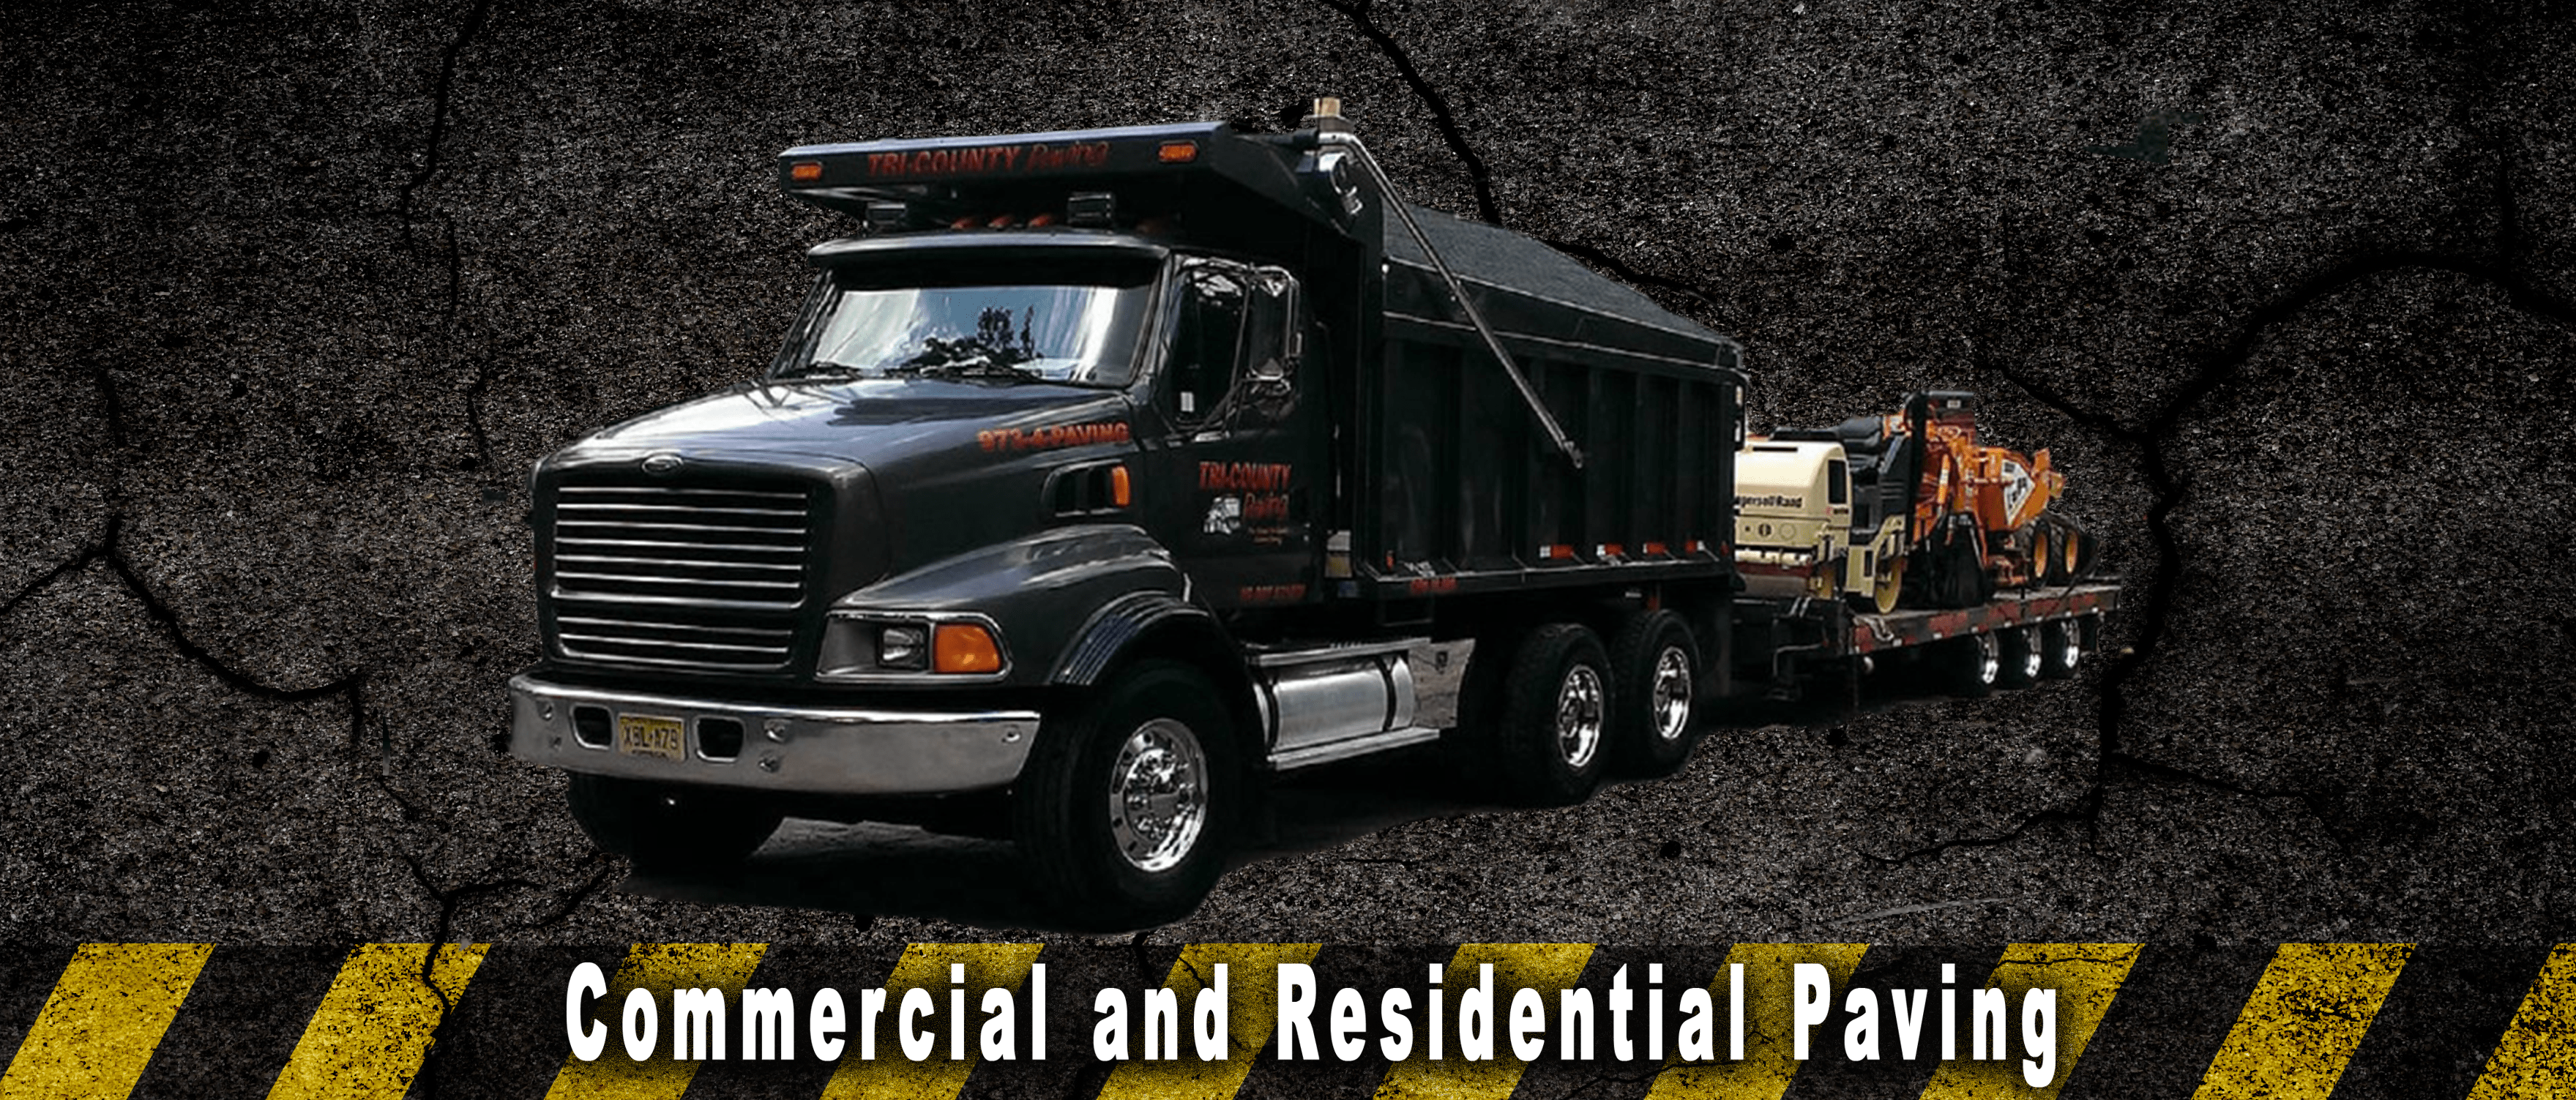 Paving Morris County New Jersey and surrounding areas